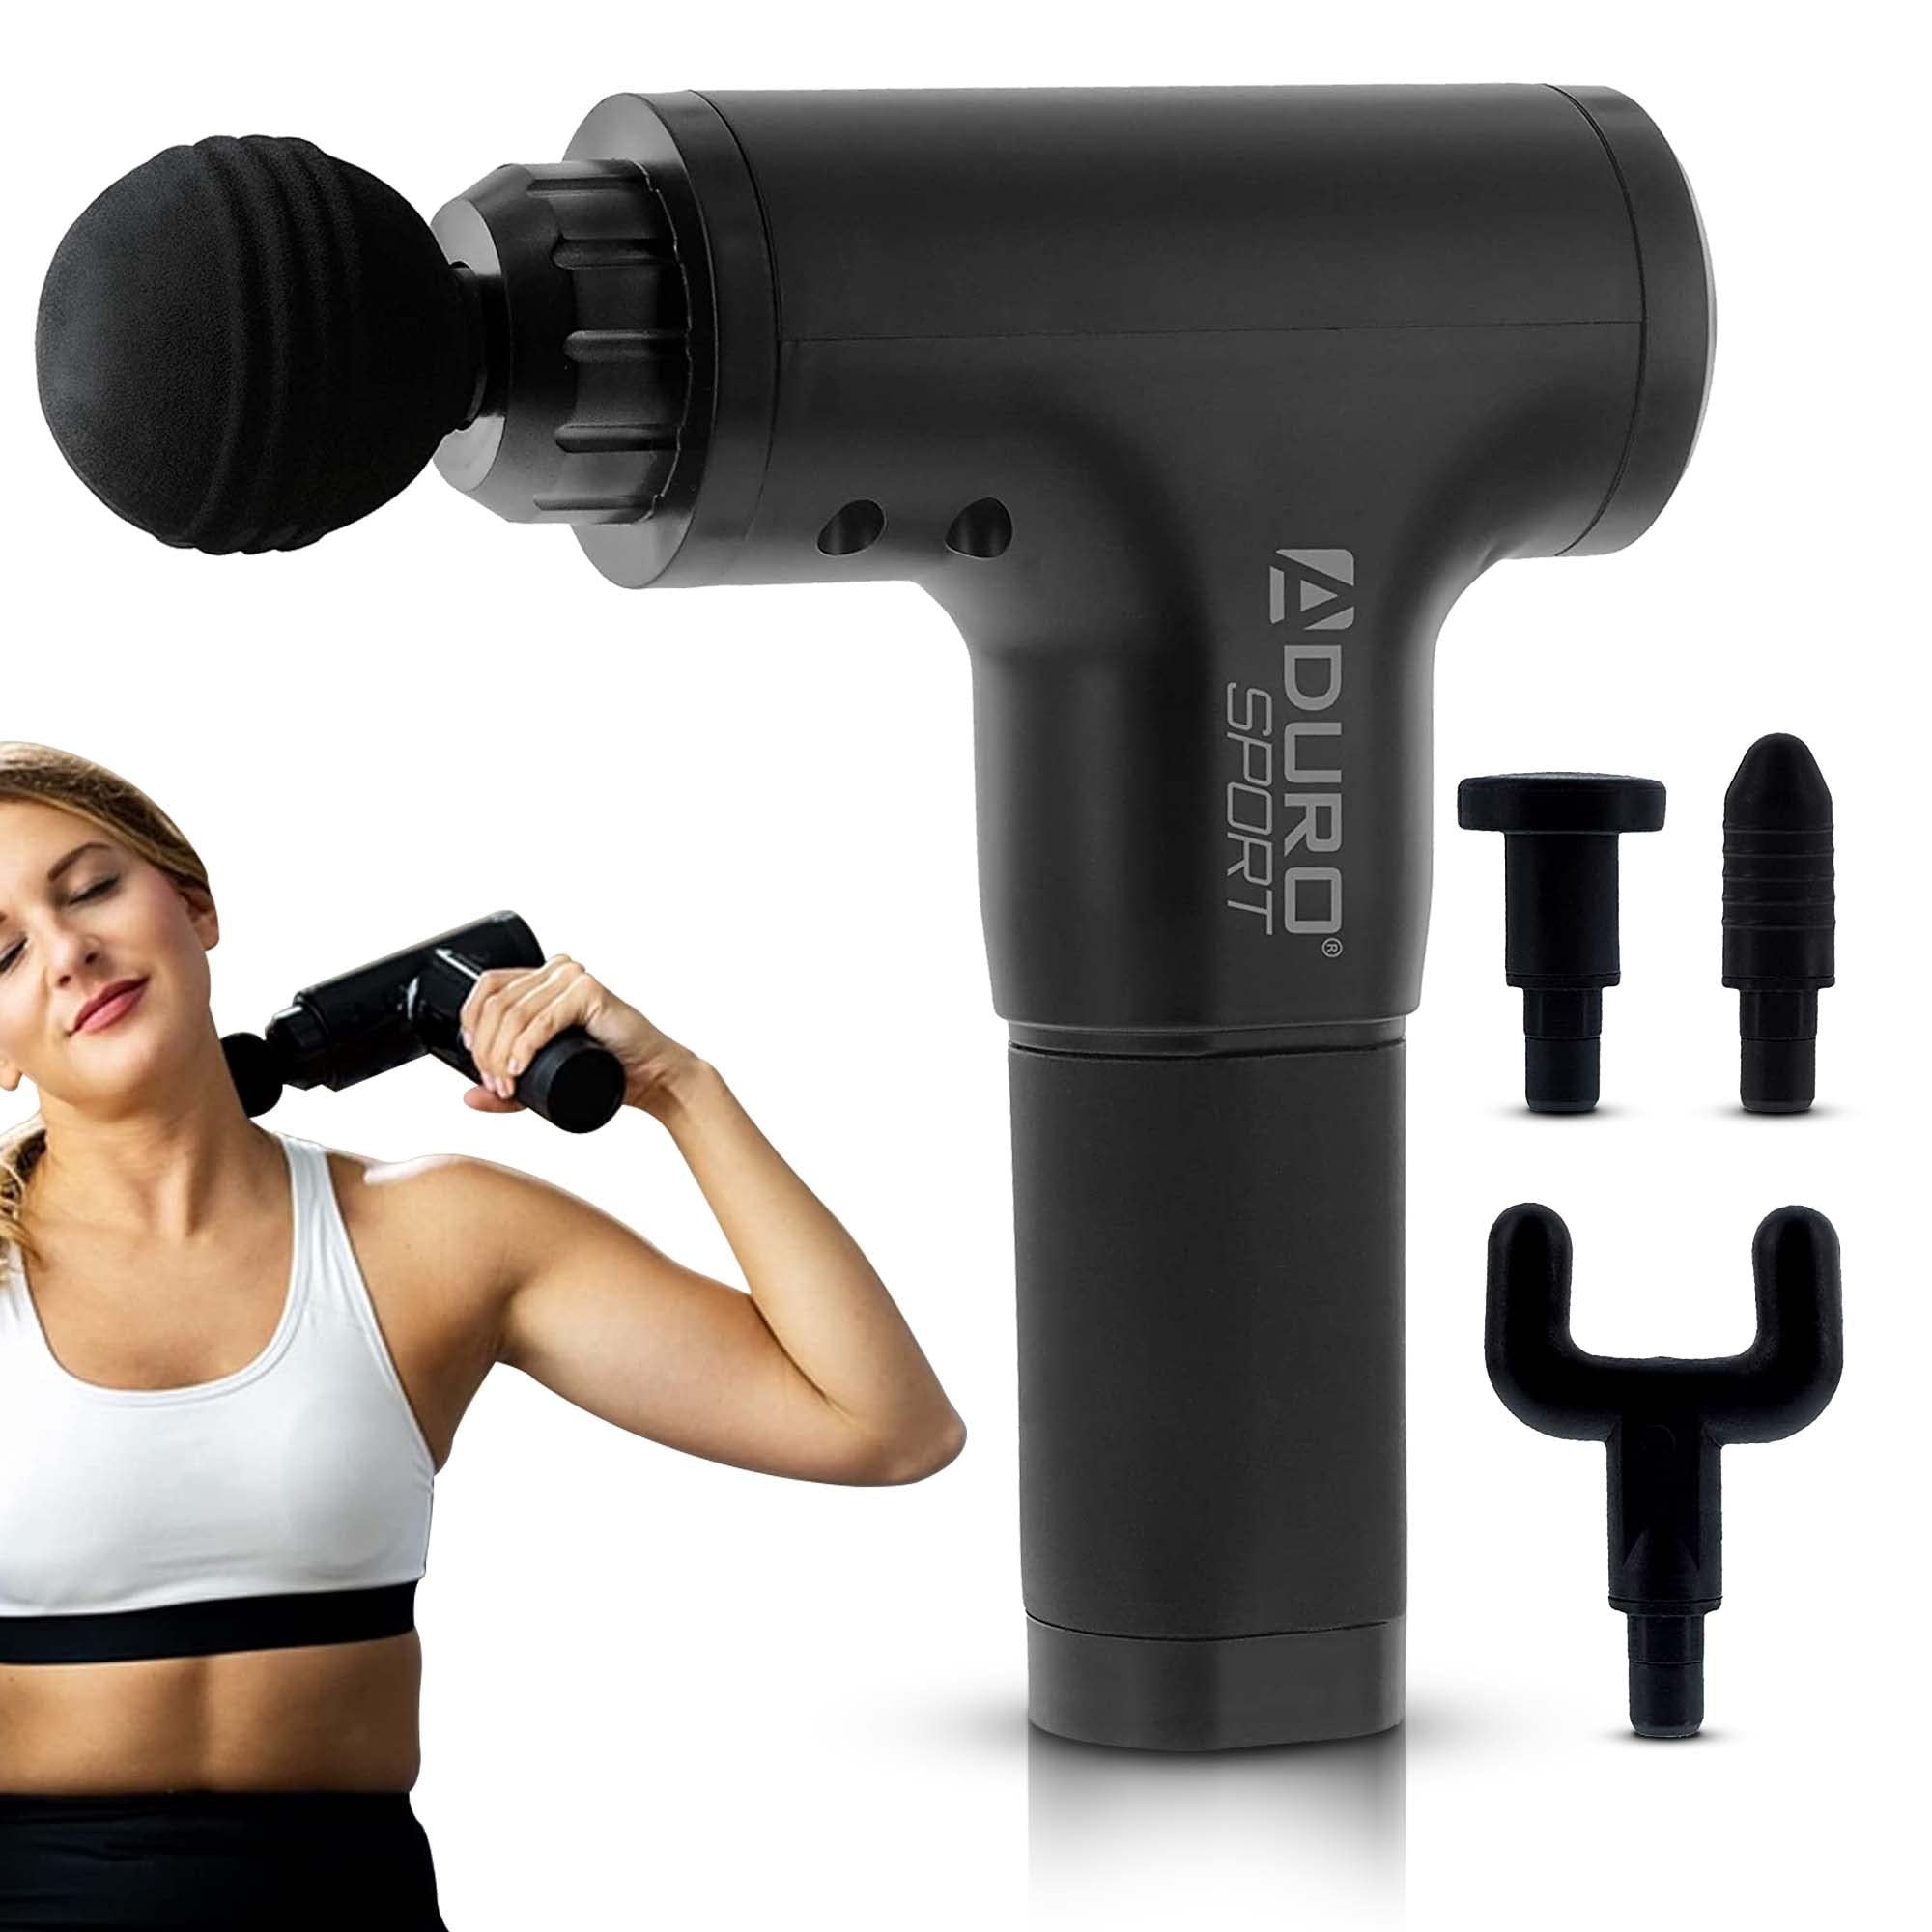 Aduro Percussion Massage Gun Deep Tissue Muscle Massage Gun Handheld, Elite Recovery™ Electric Hand Held Therapy Massager Gun Perfect for Athletes Full Body, Back, Neck, Shoulder Pain Relief (Black)